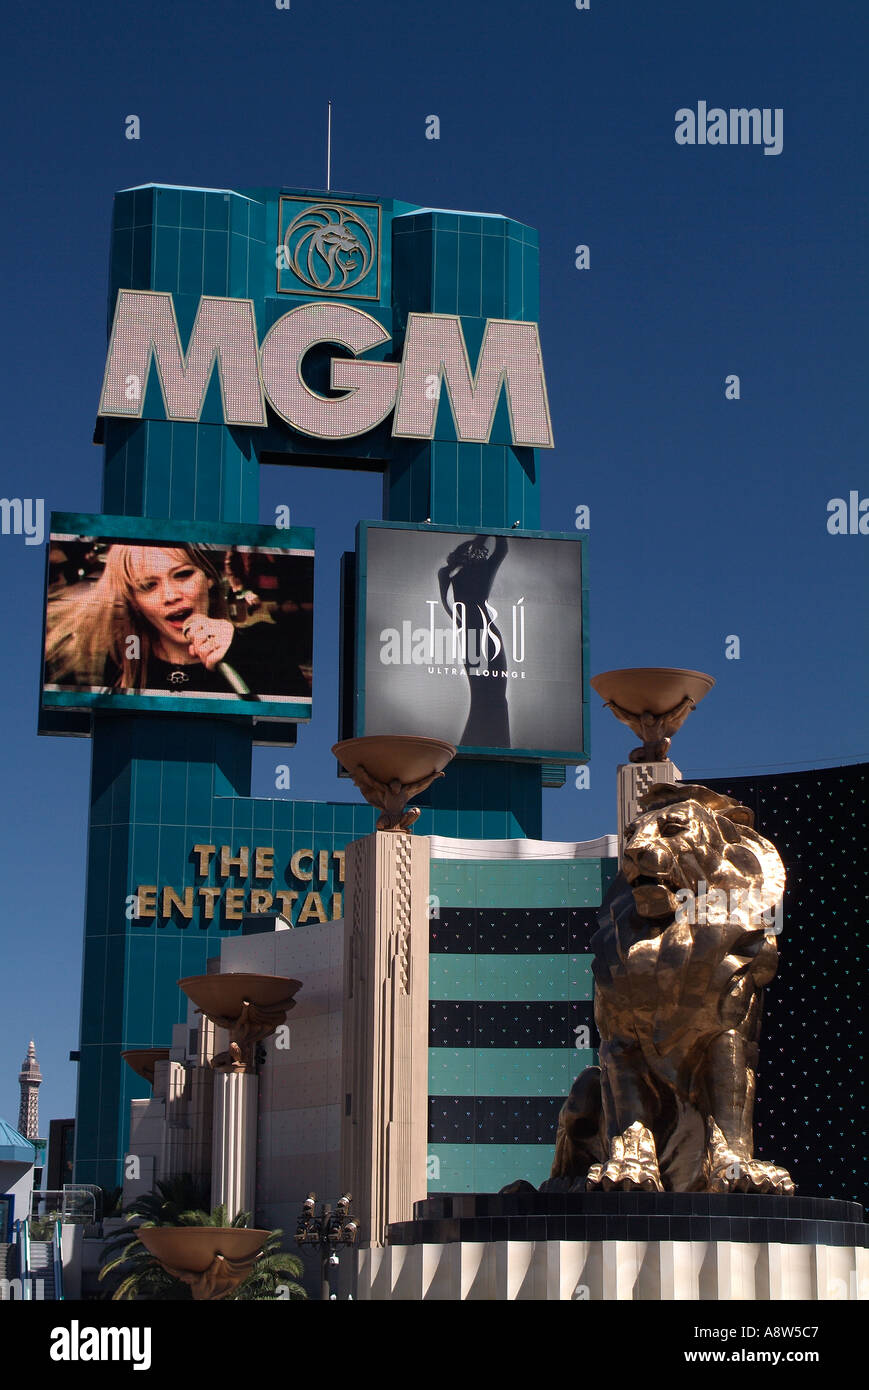 The giant billboard outside the MGM Grand Las Vegas Stock Photo